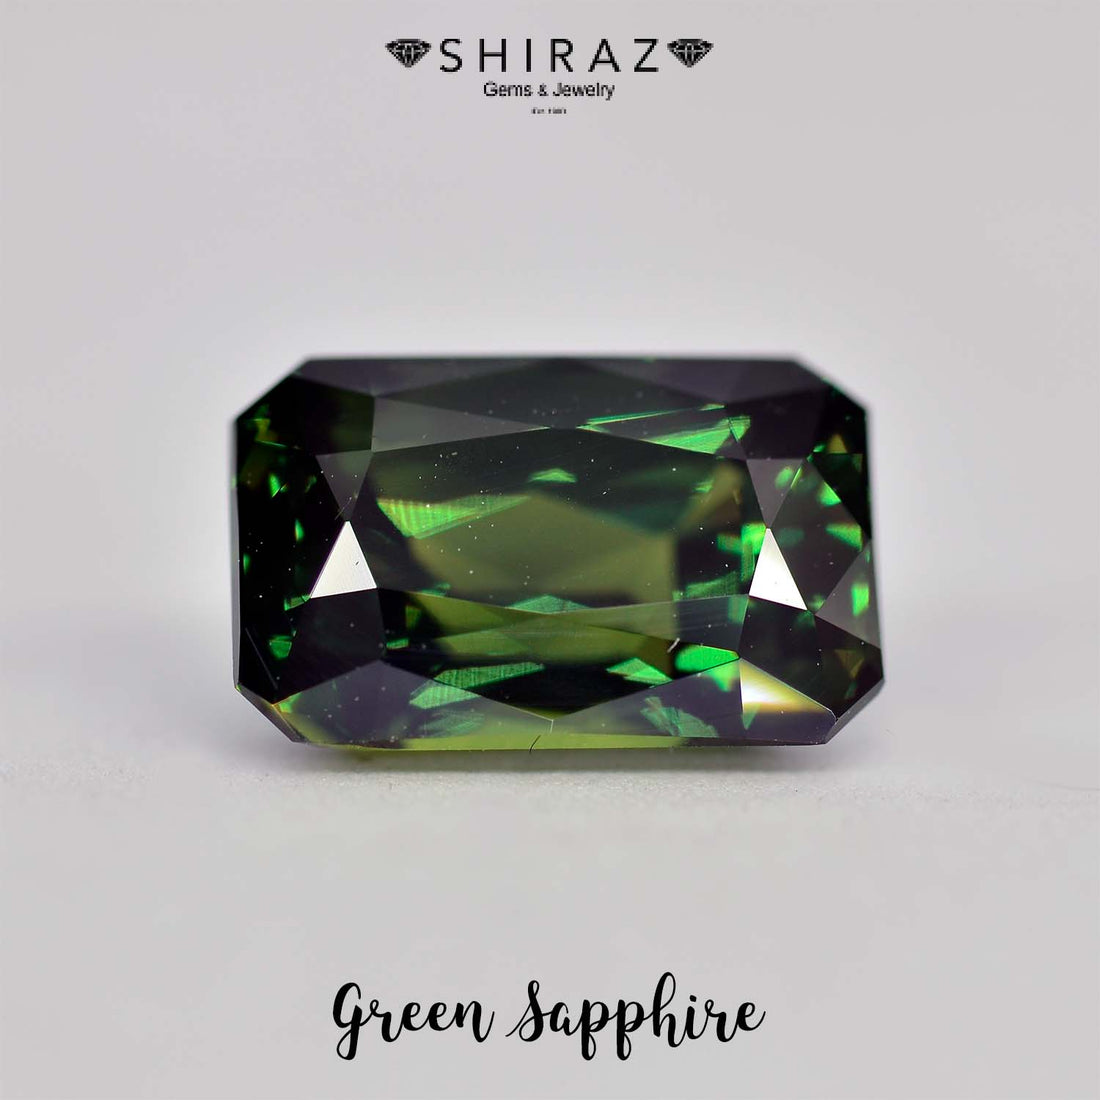 Thai green sapphires are well known for its color and affordable price.